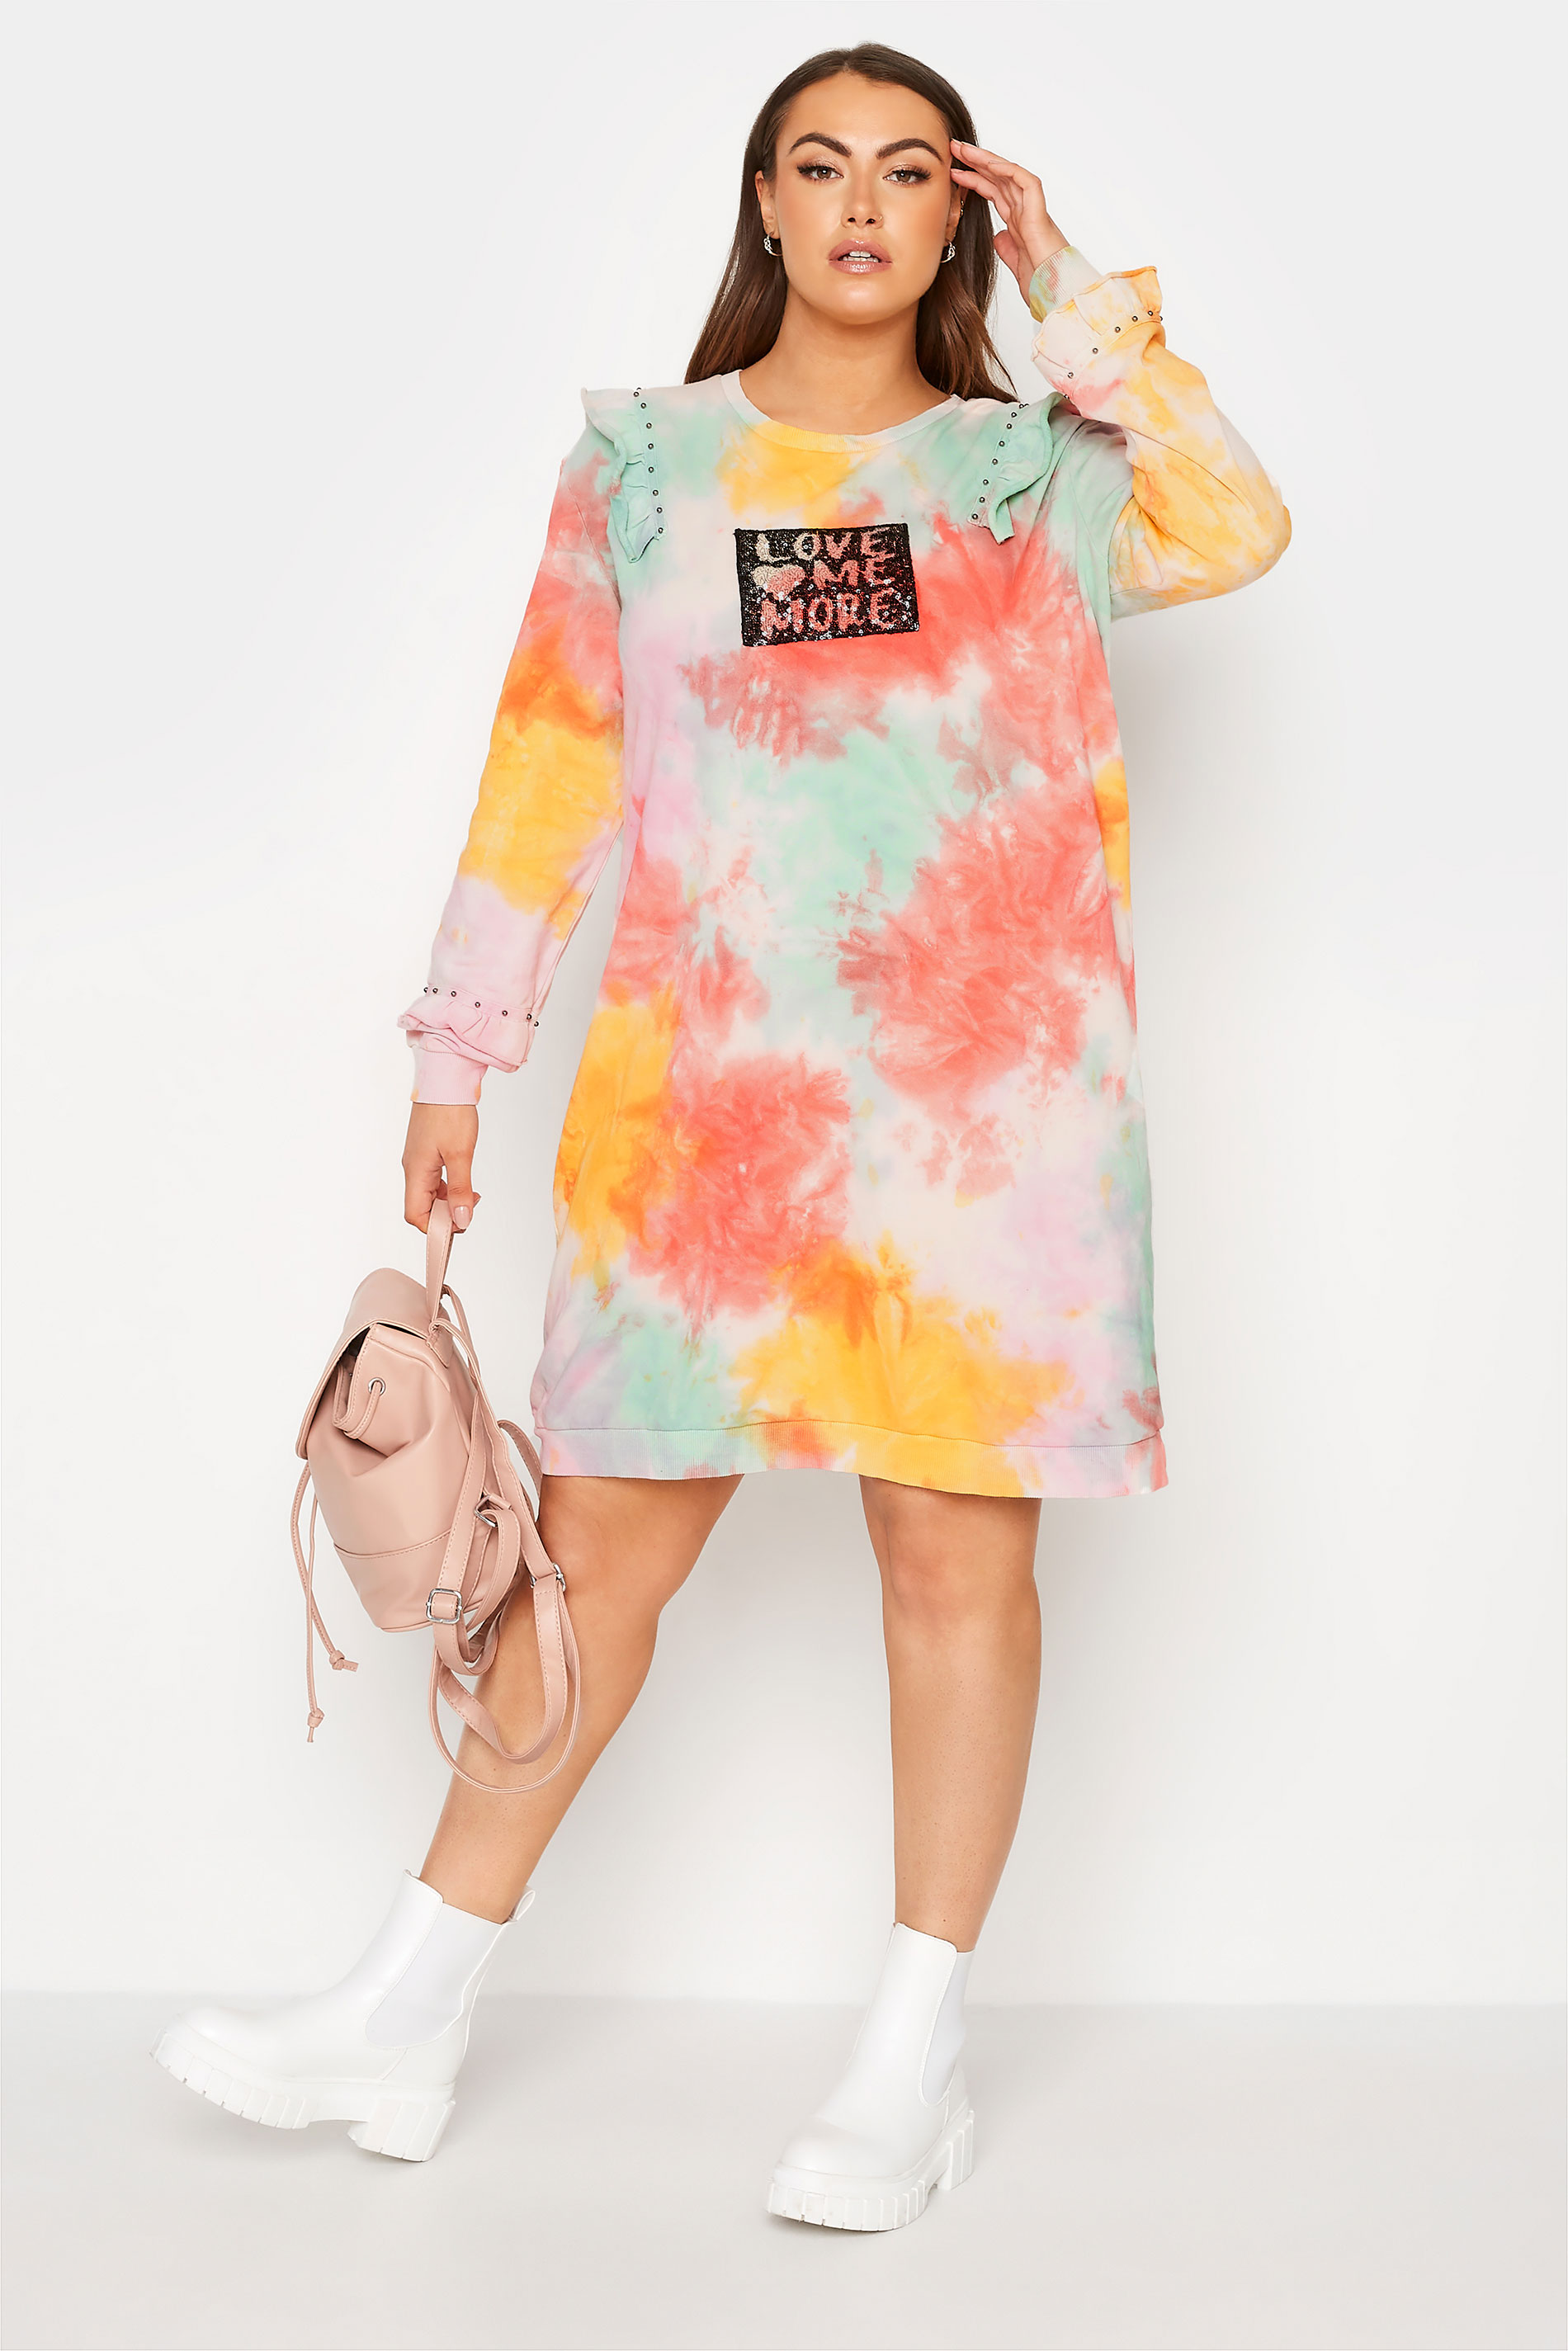 Robes Grande Taille Grande taille  Robes Manches Longues | Robe-Pull Pastel Tâchetée 'Love Me More' - VK39308